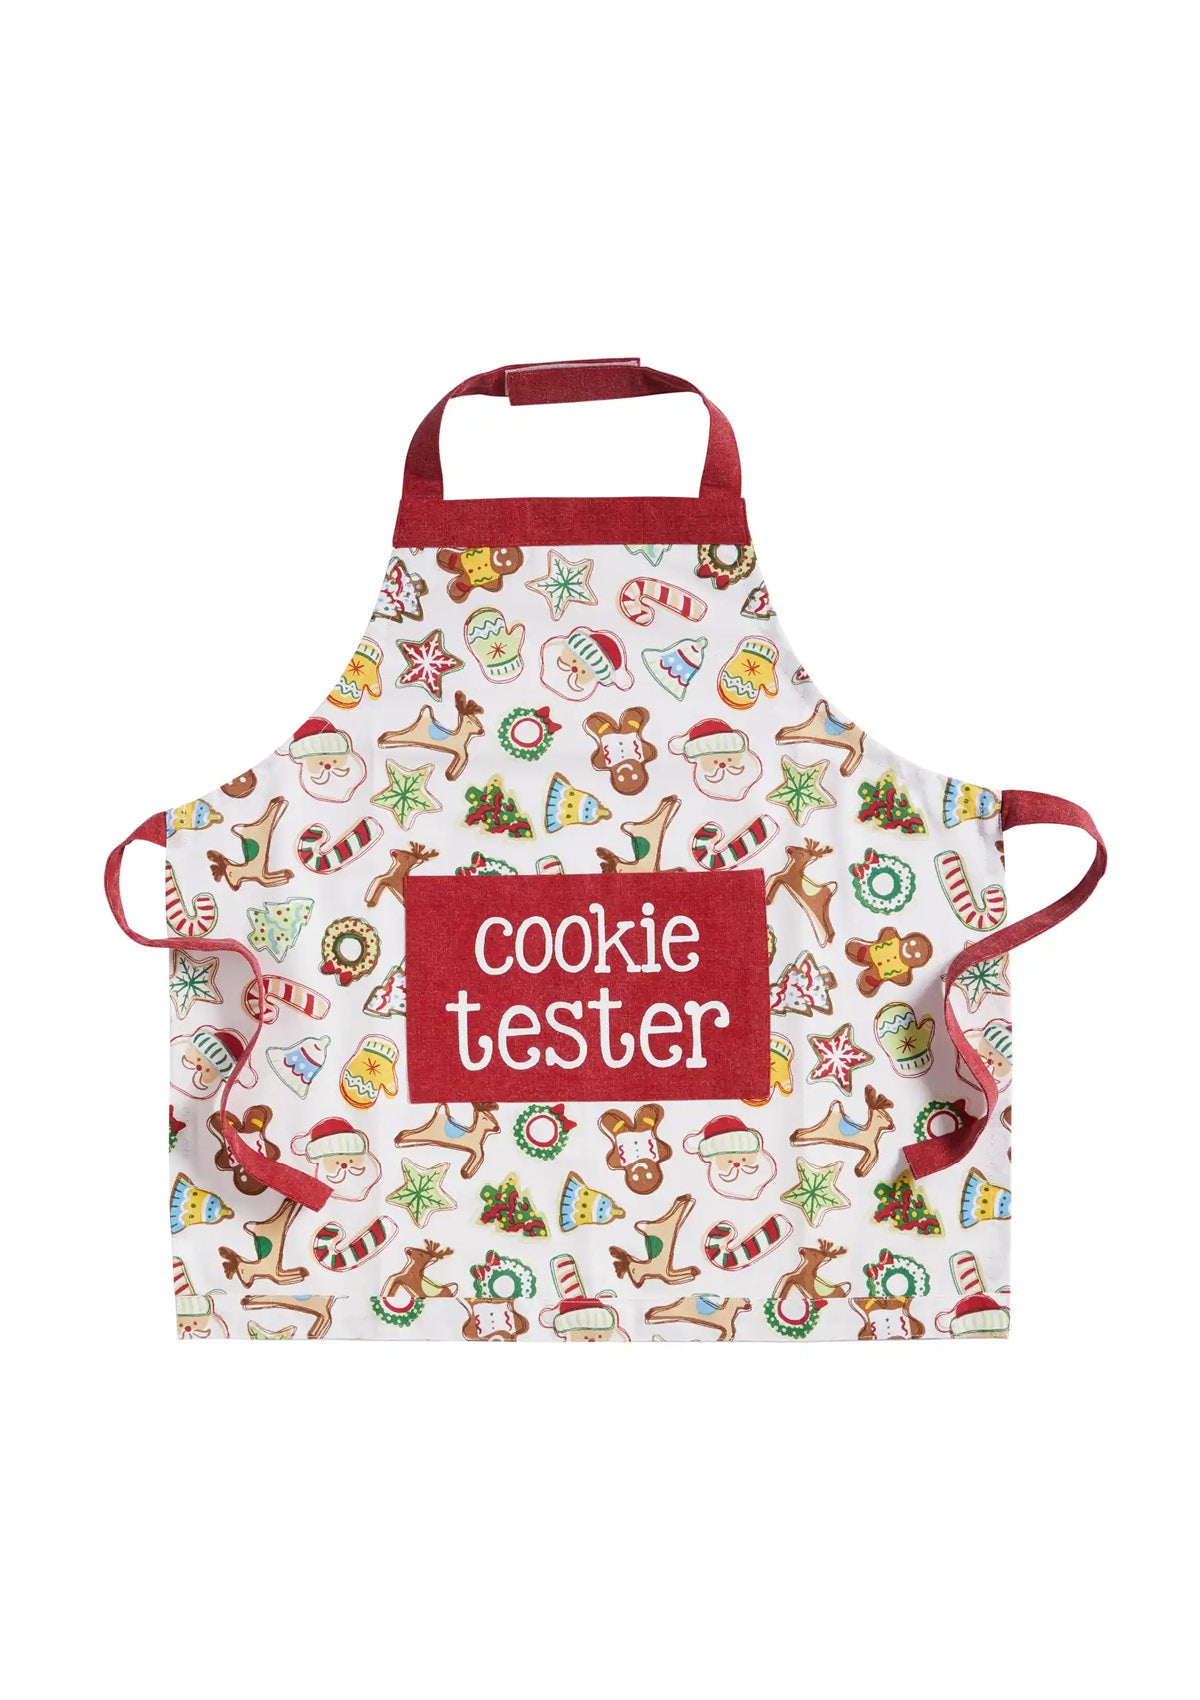 'Cookie Maker' & 'Cookie Tester' Christmas Aprons